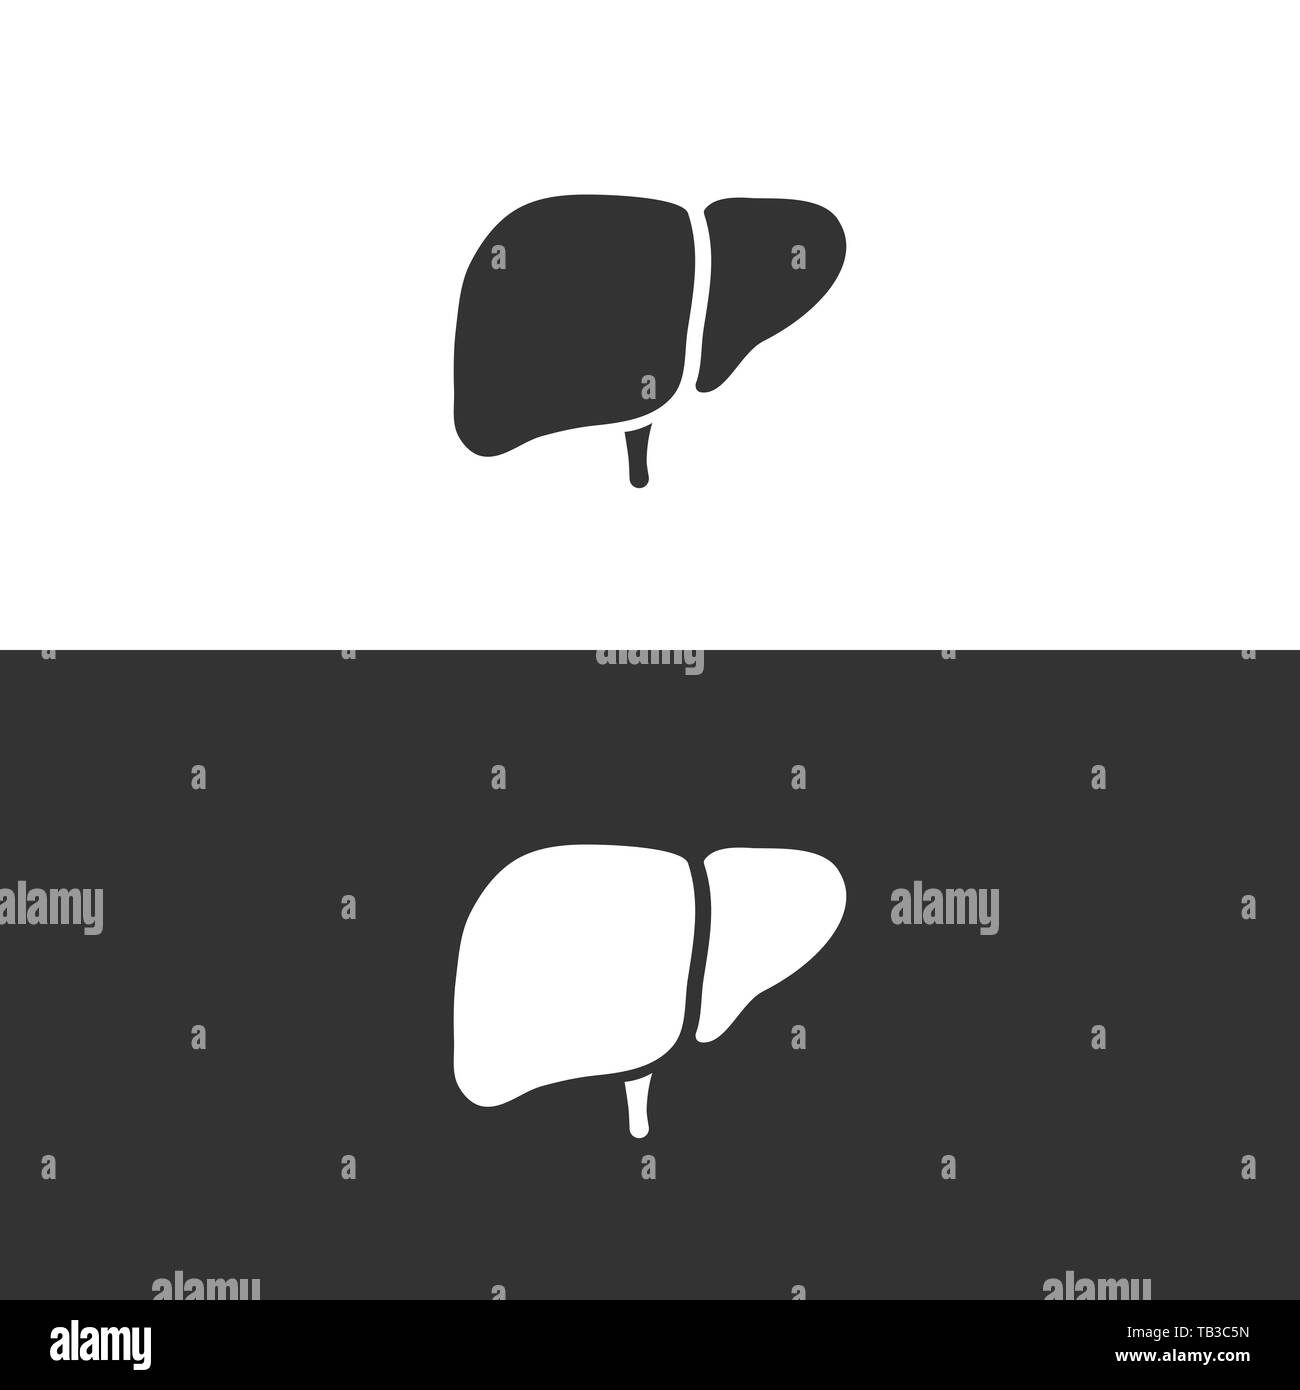 Liver icon on black and white background. Vector illustration Stock Vector